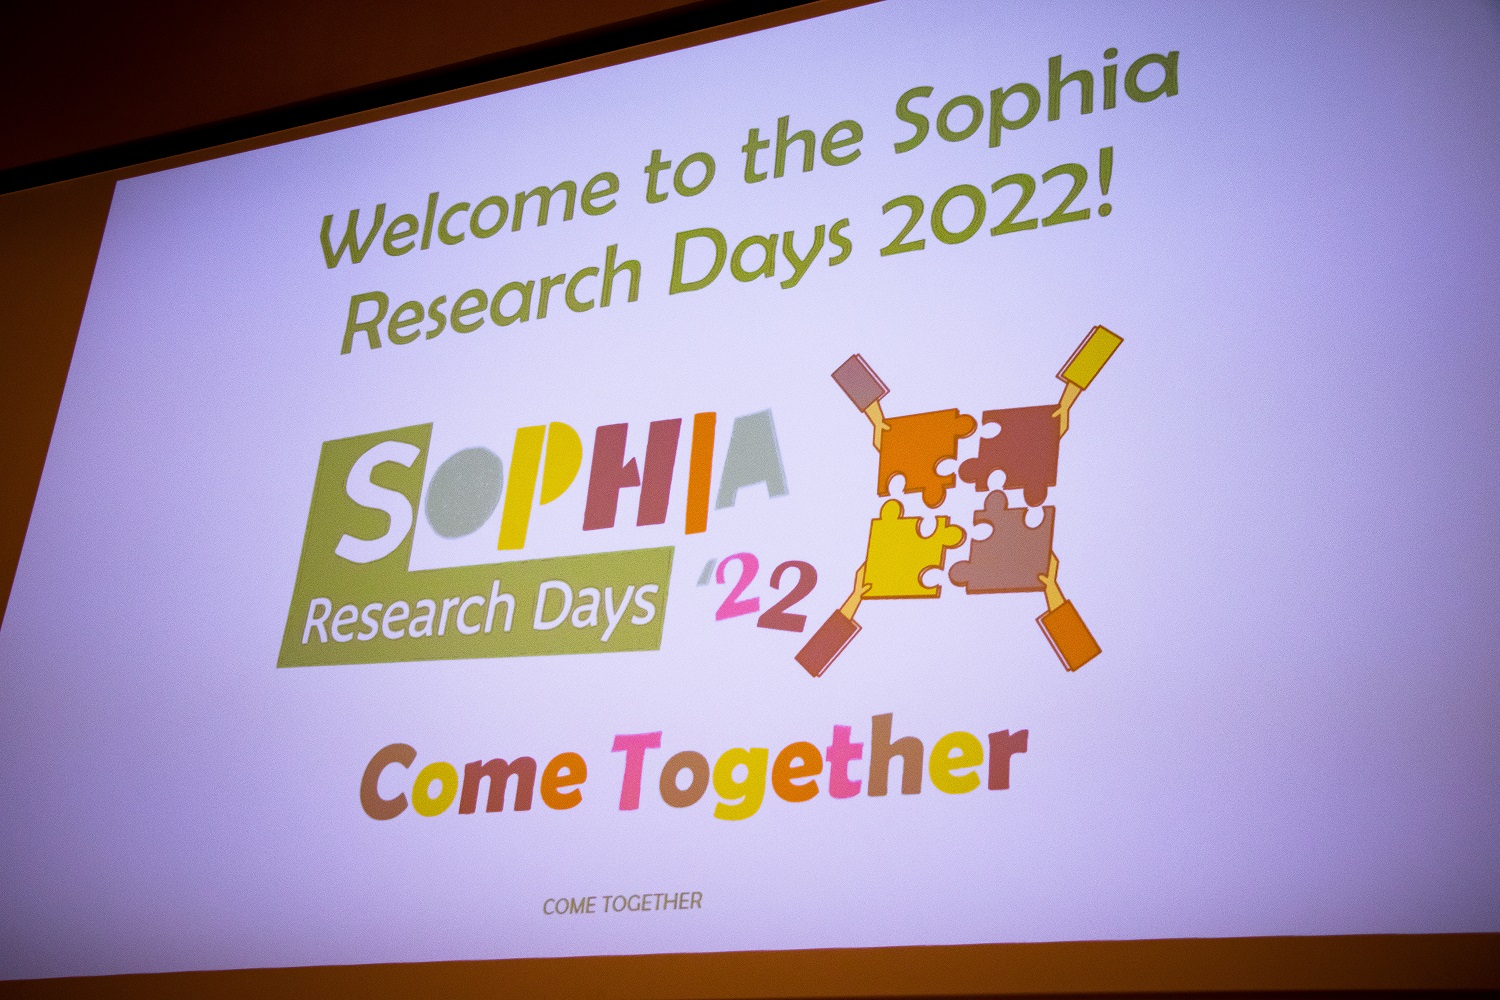 Previous edition Sophia Research Day 2023